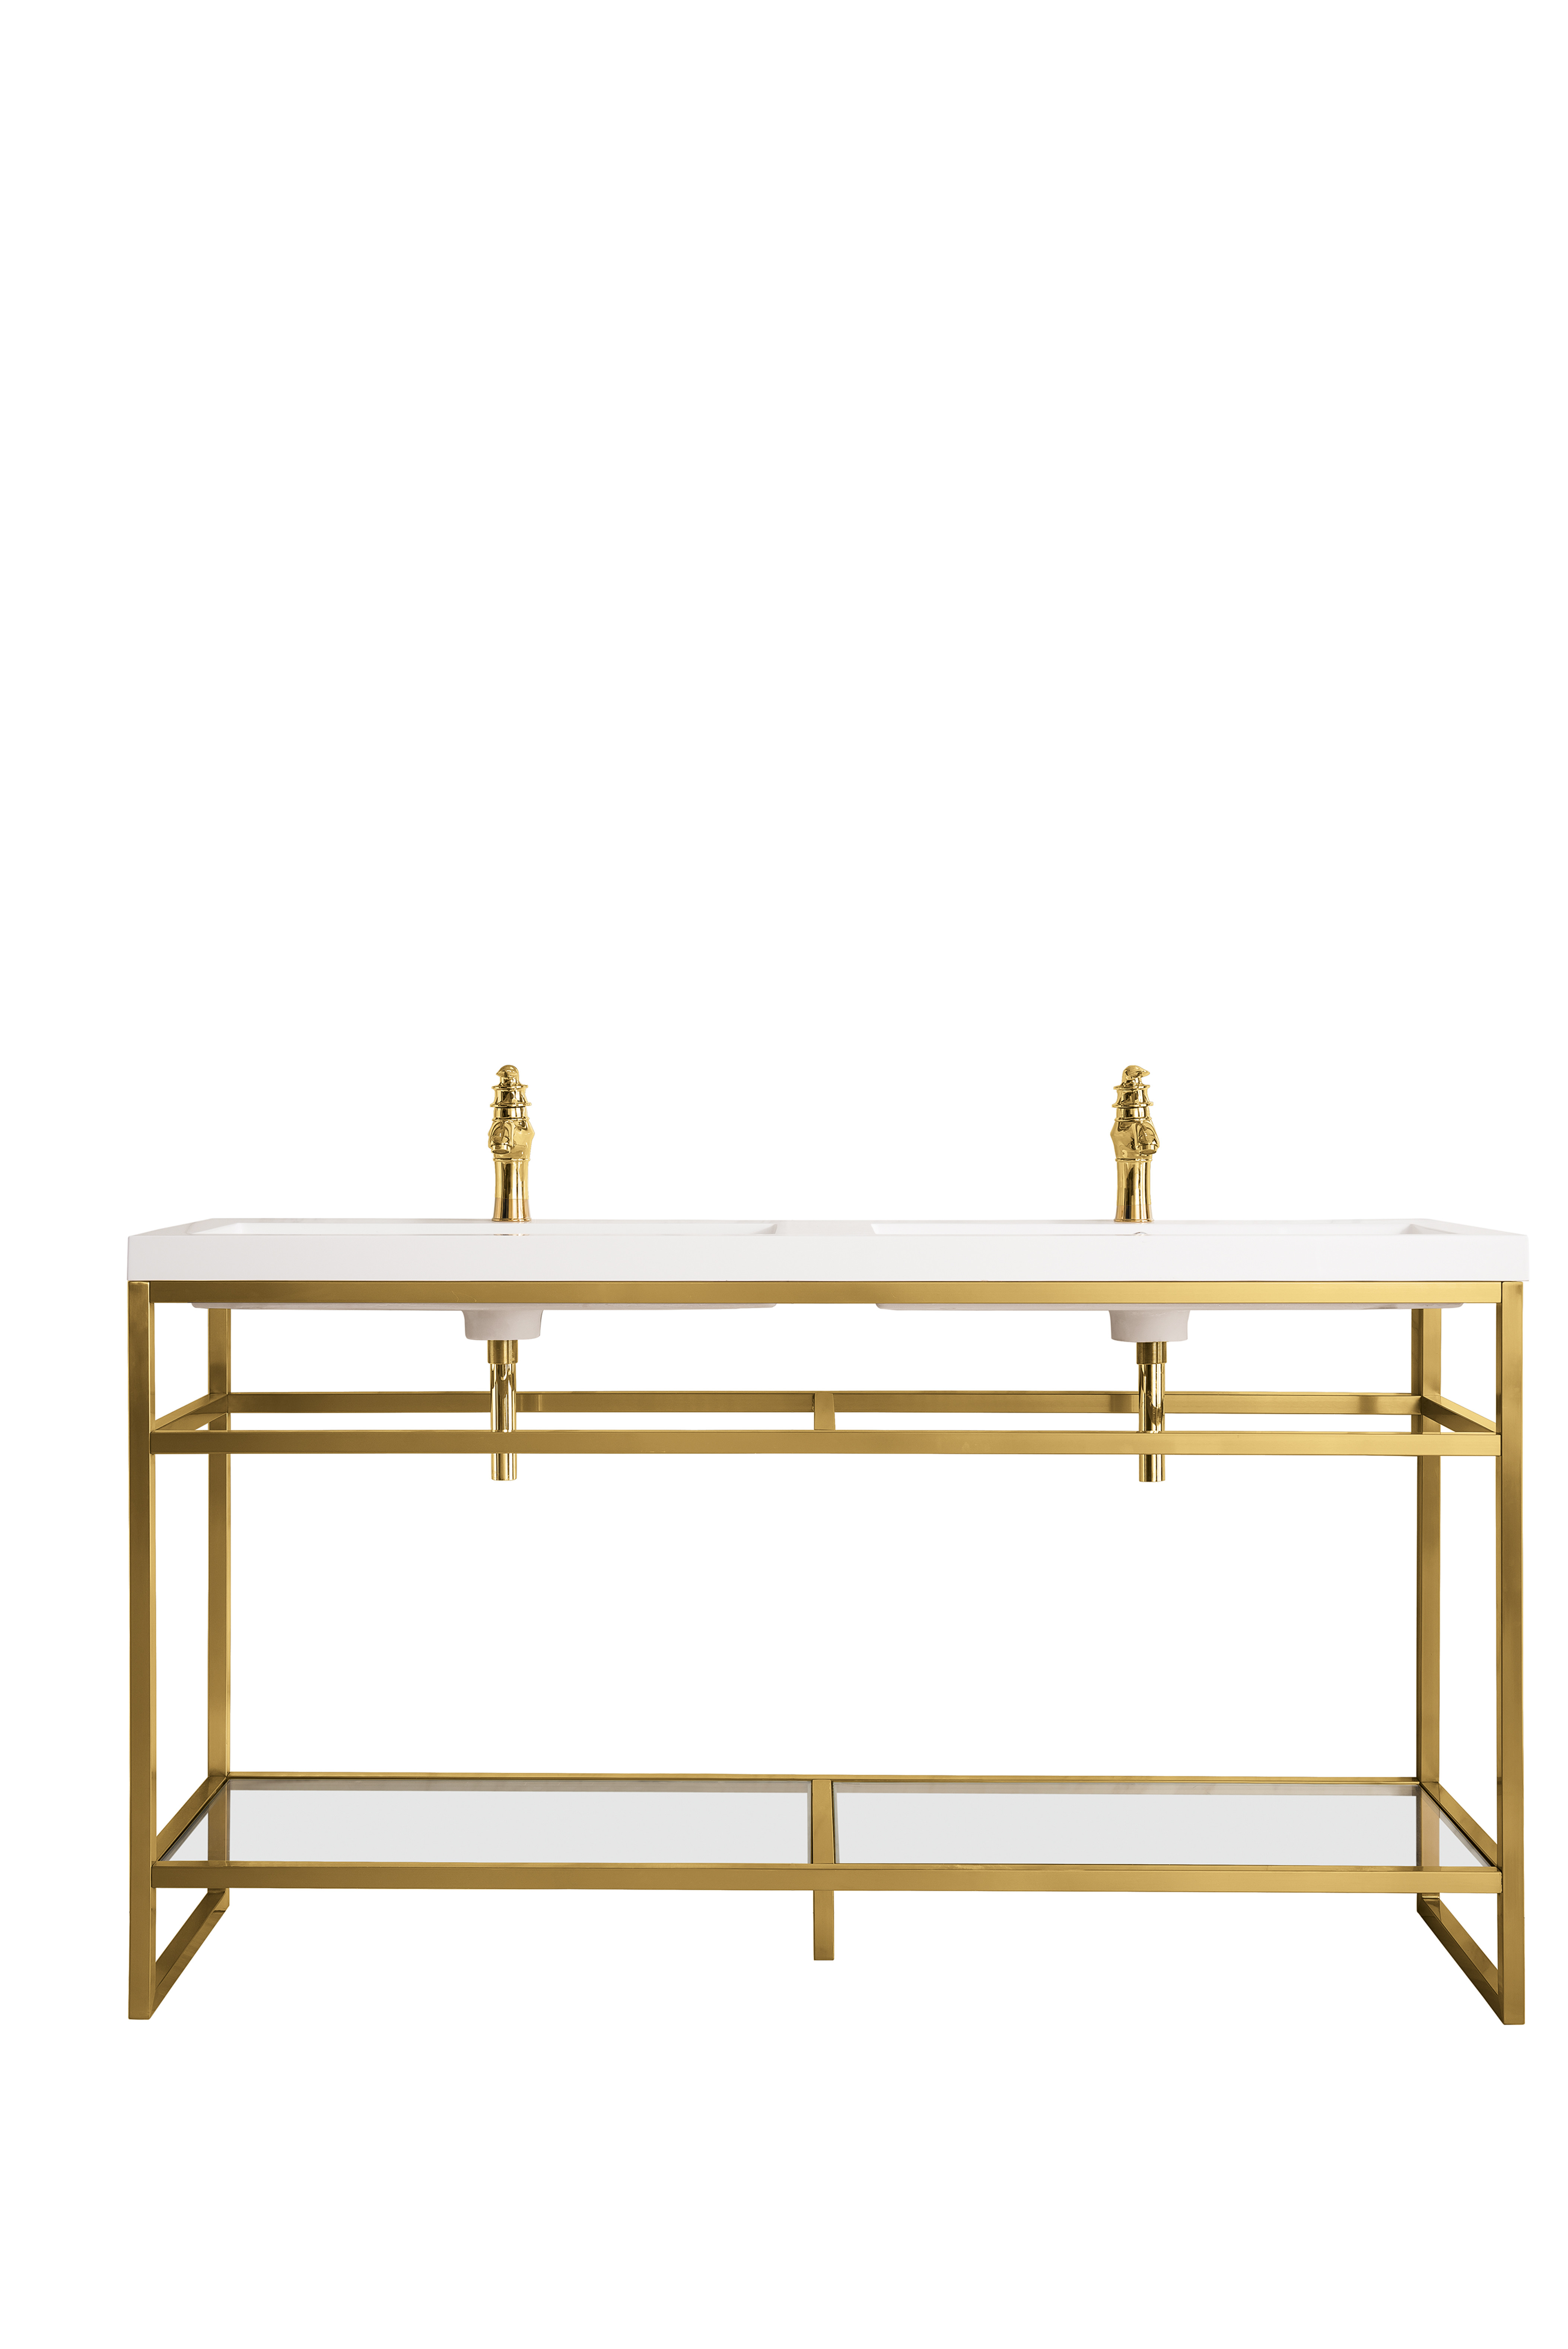 James Martin C105V63RGDWG Boston 63" Stainless Steel Sink Console (Double Basins), Radiant Gold w/ White Glossy Composite Countertop